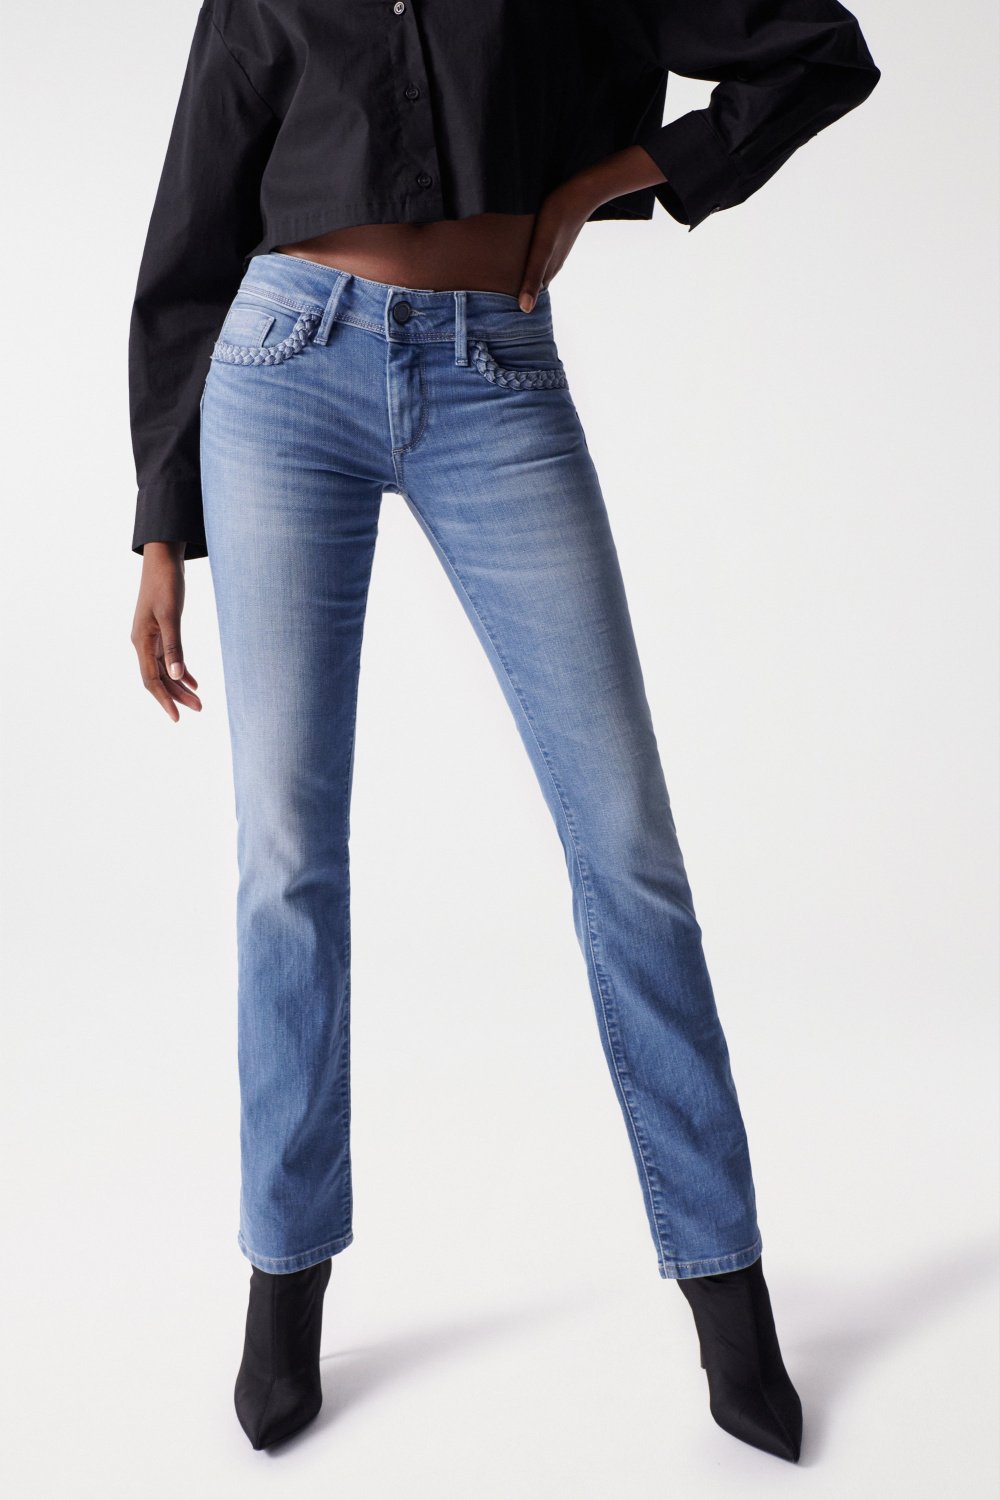 PUSH UP WONDER JEANS WITH PLAIT DETAIL ON THE POCKETS - Salsa